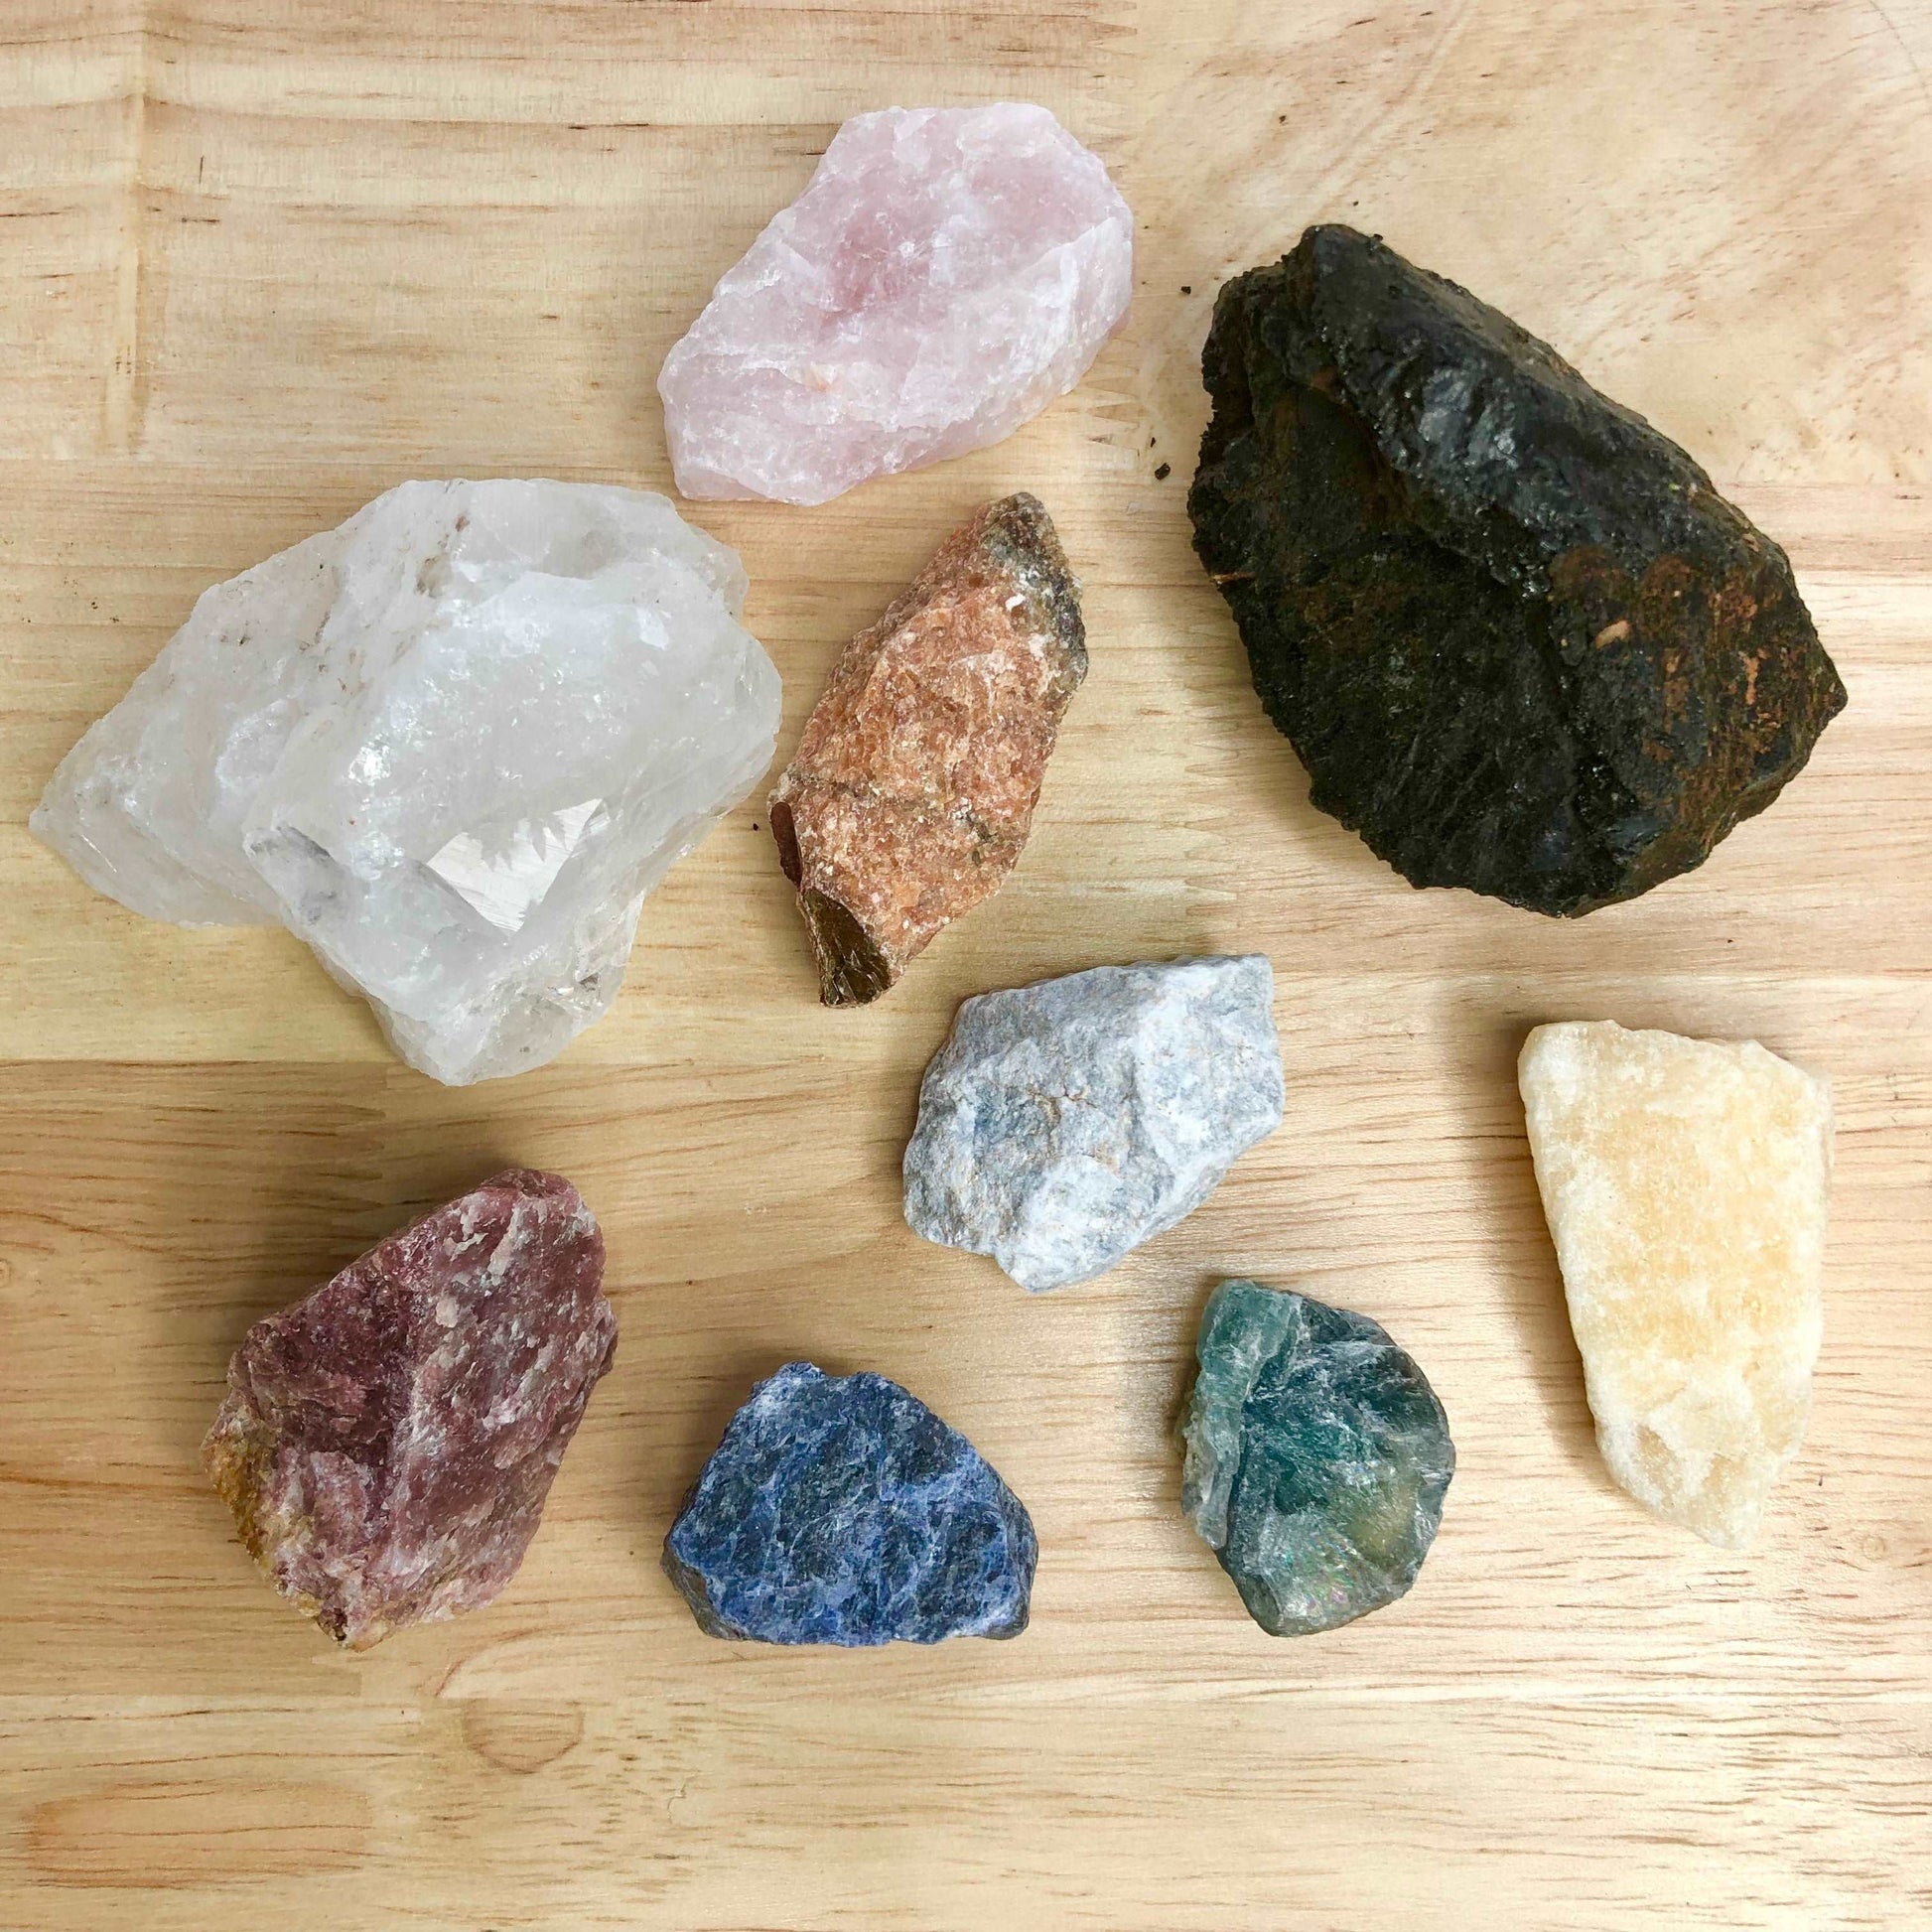 Bundle of rough crystals (9 raw crystals in kit)